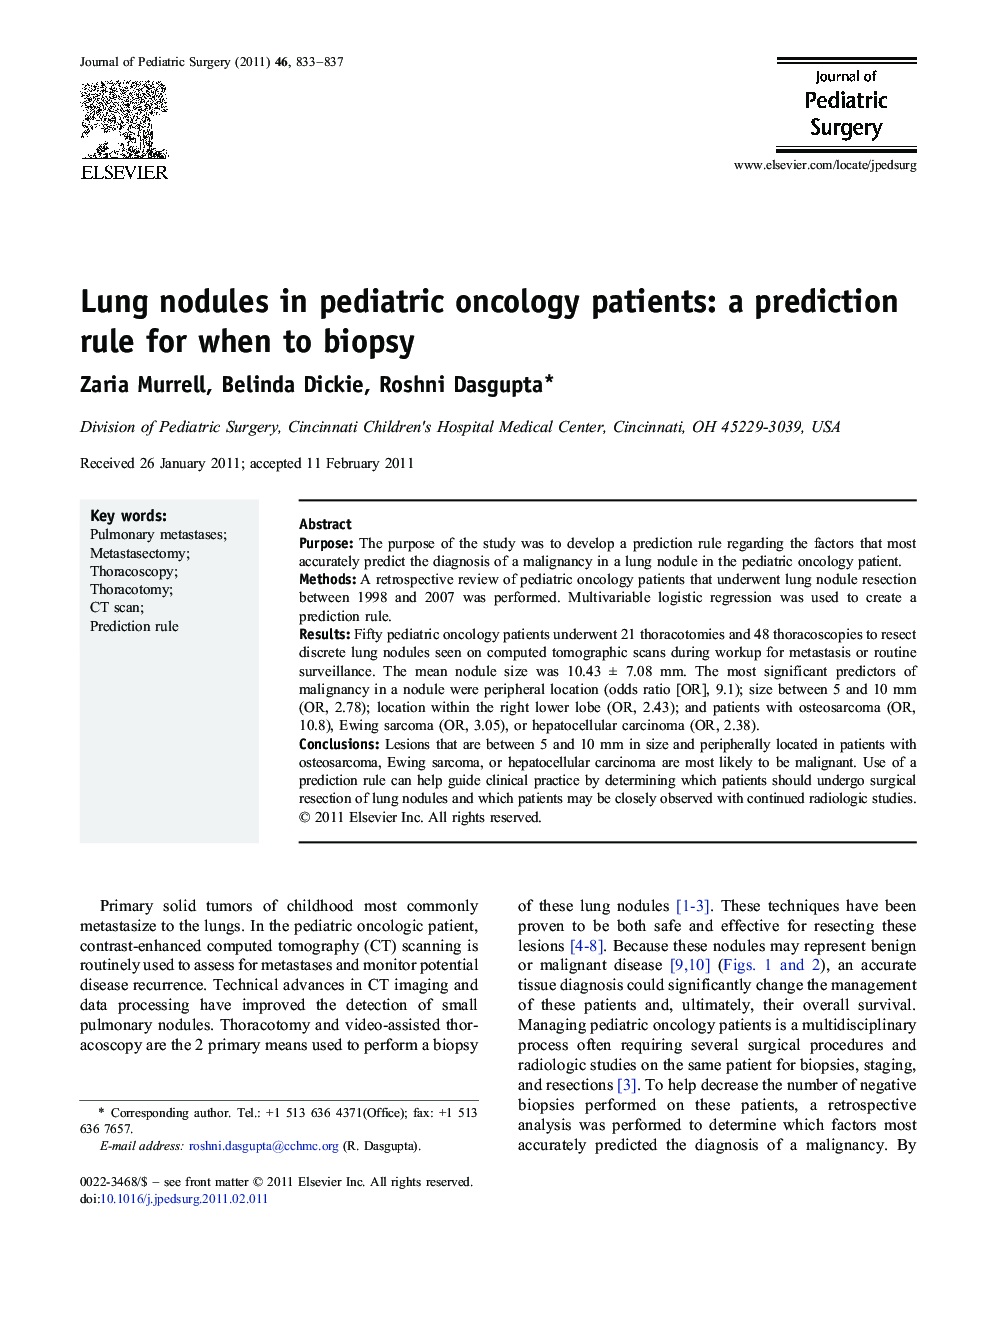 Lung nodules in pediatric oncology patients: a prediction rule for when to biopsy